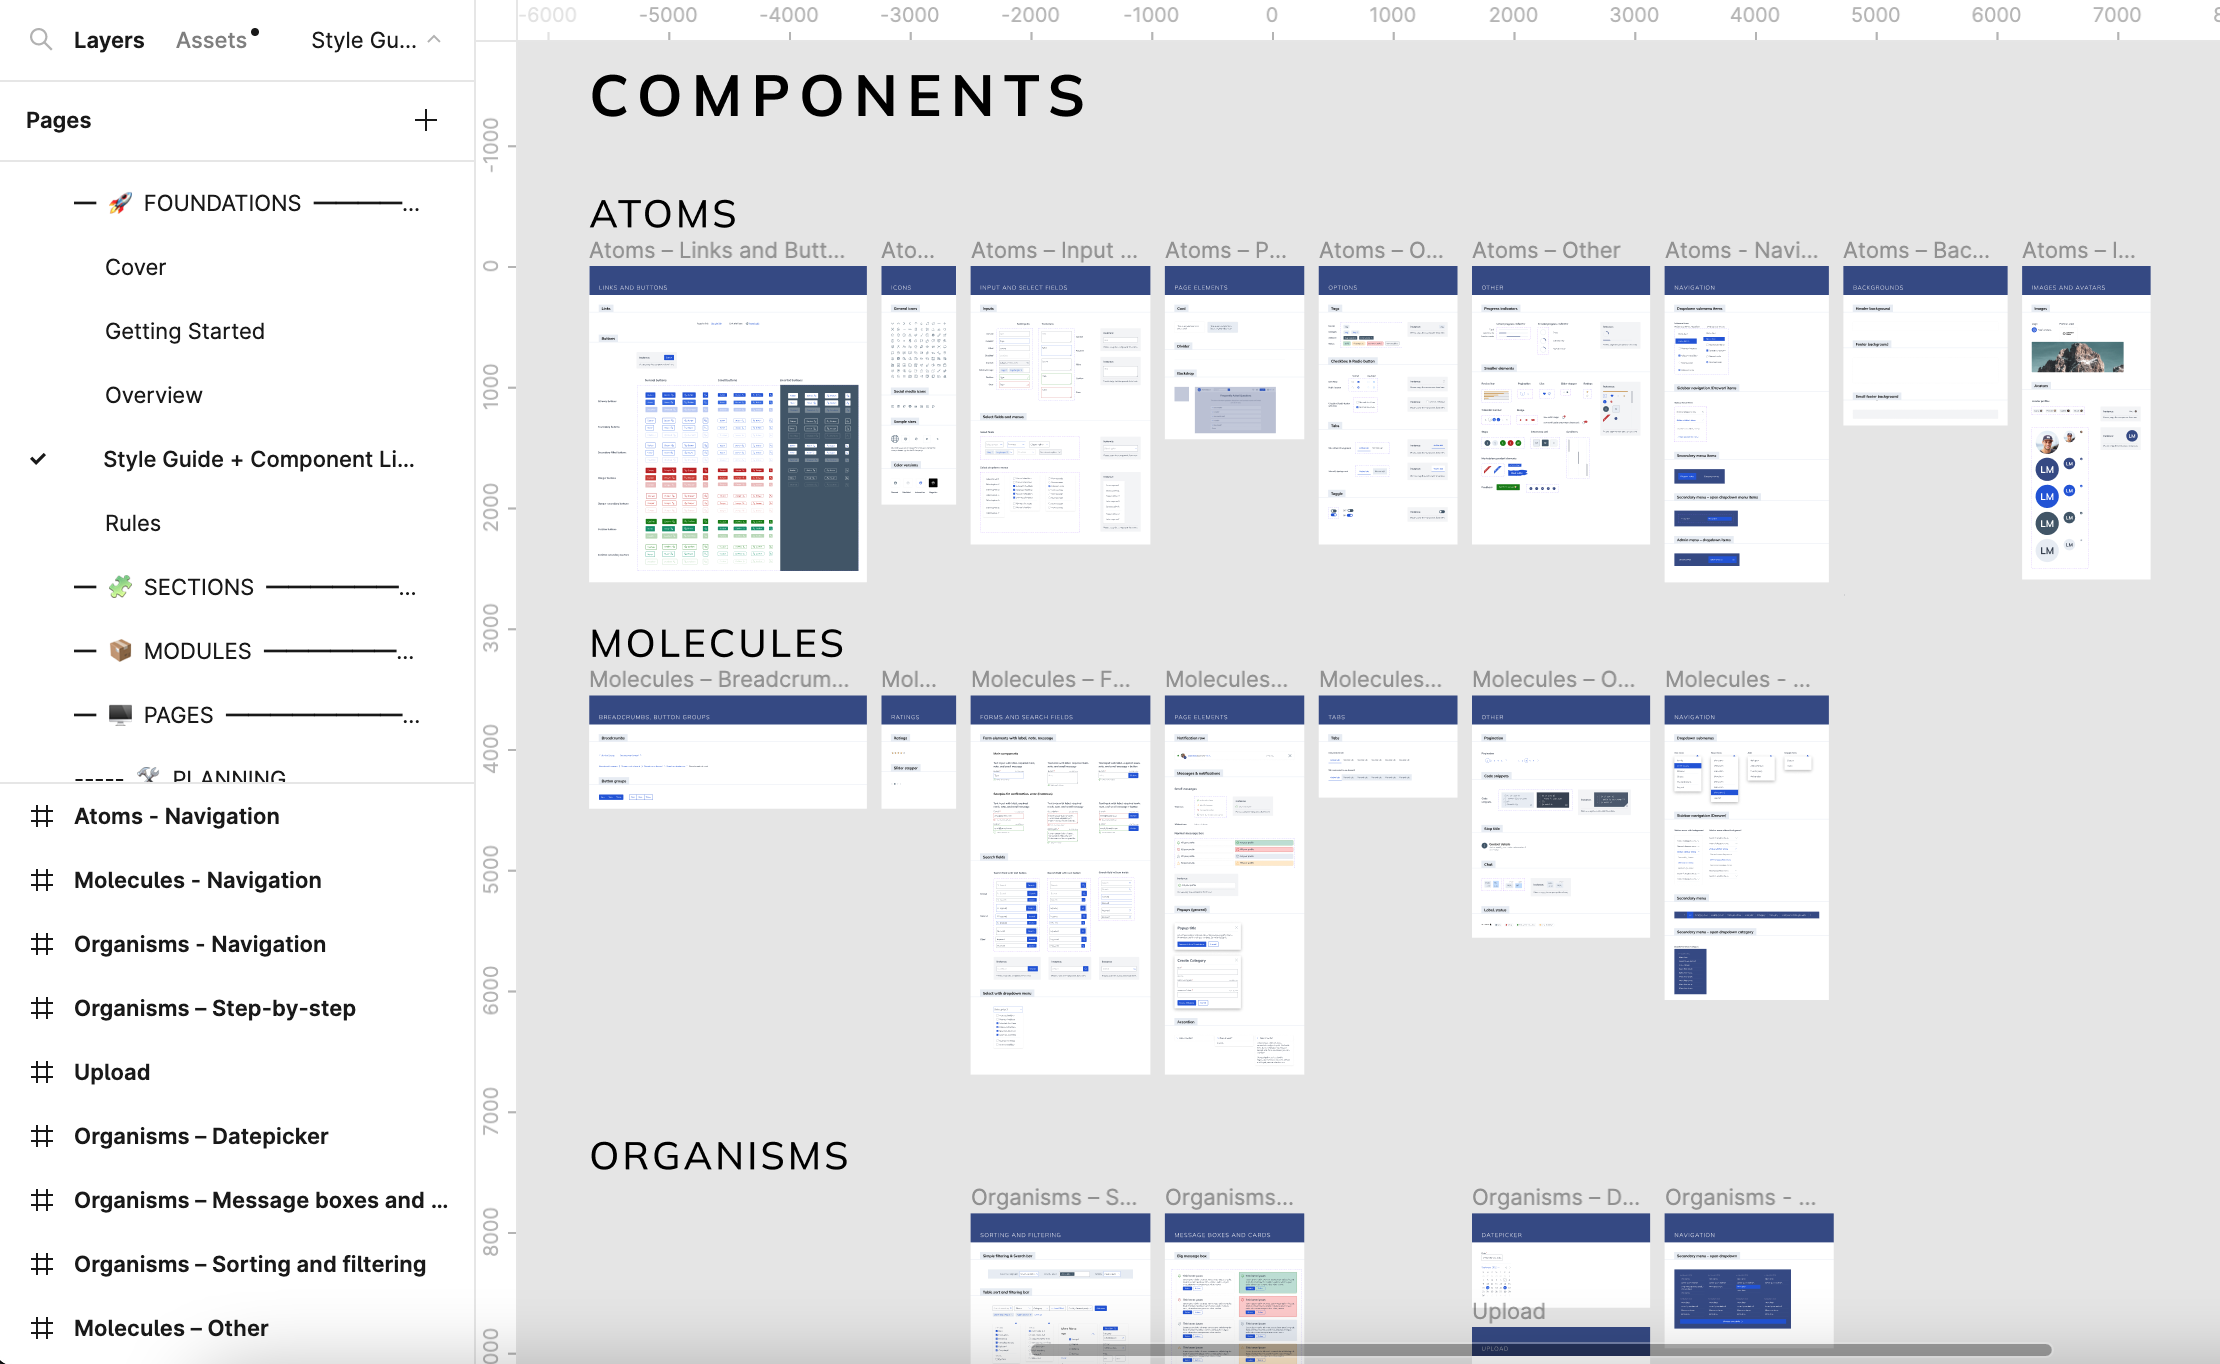 The view of the Components in the Style Guide + Components page